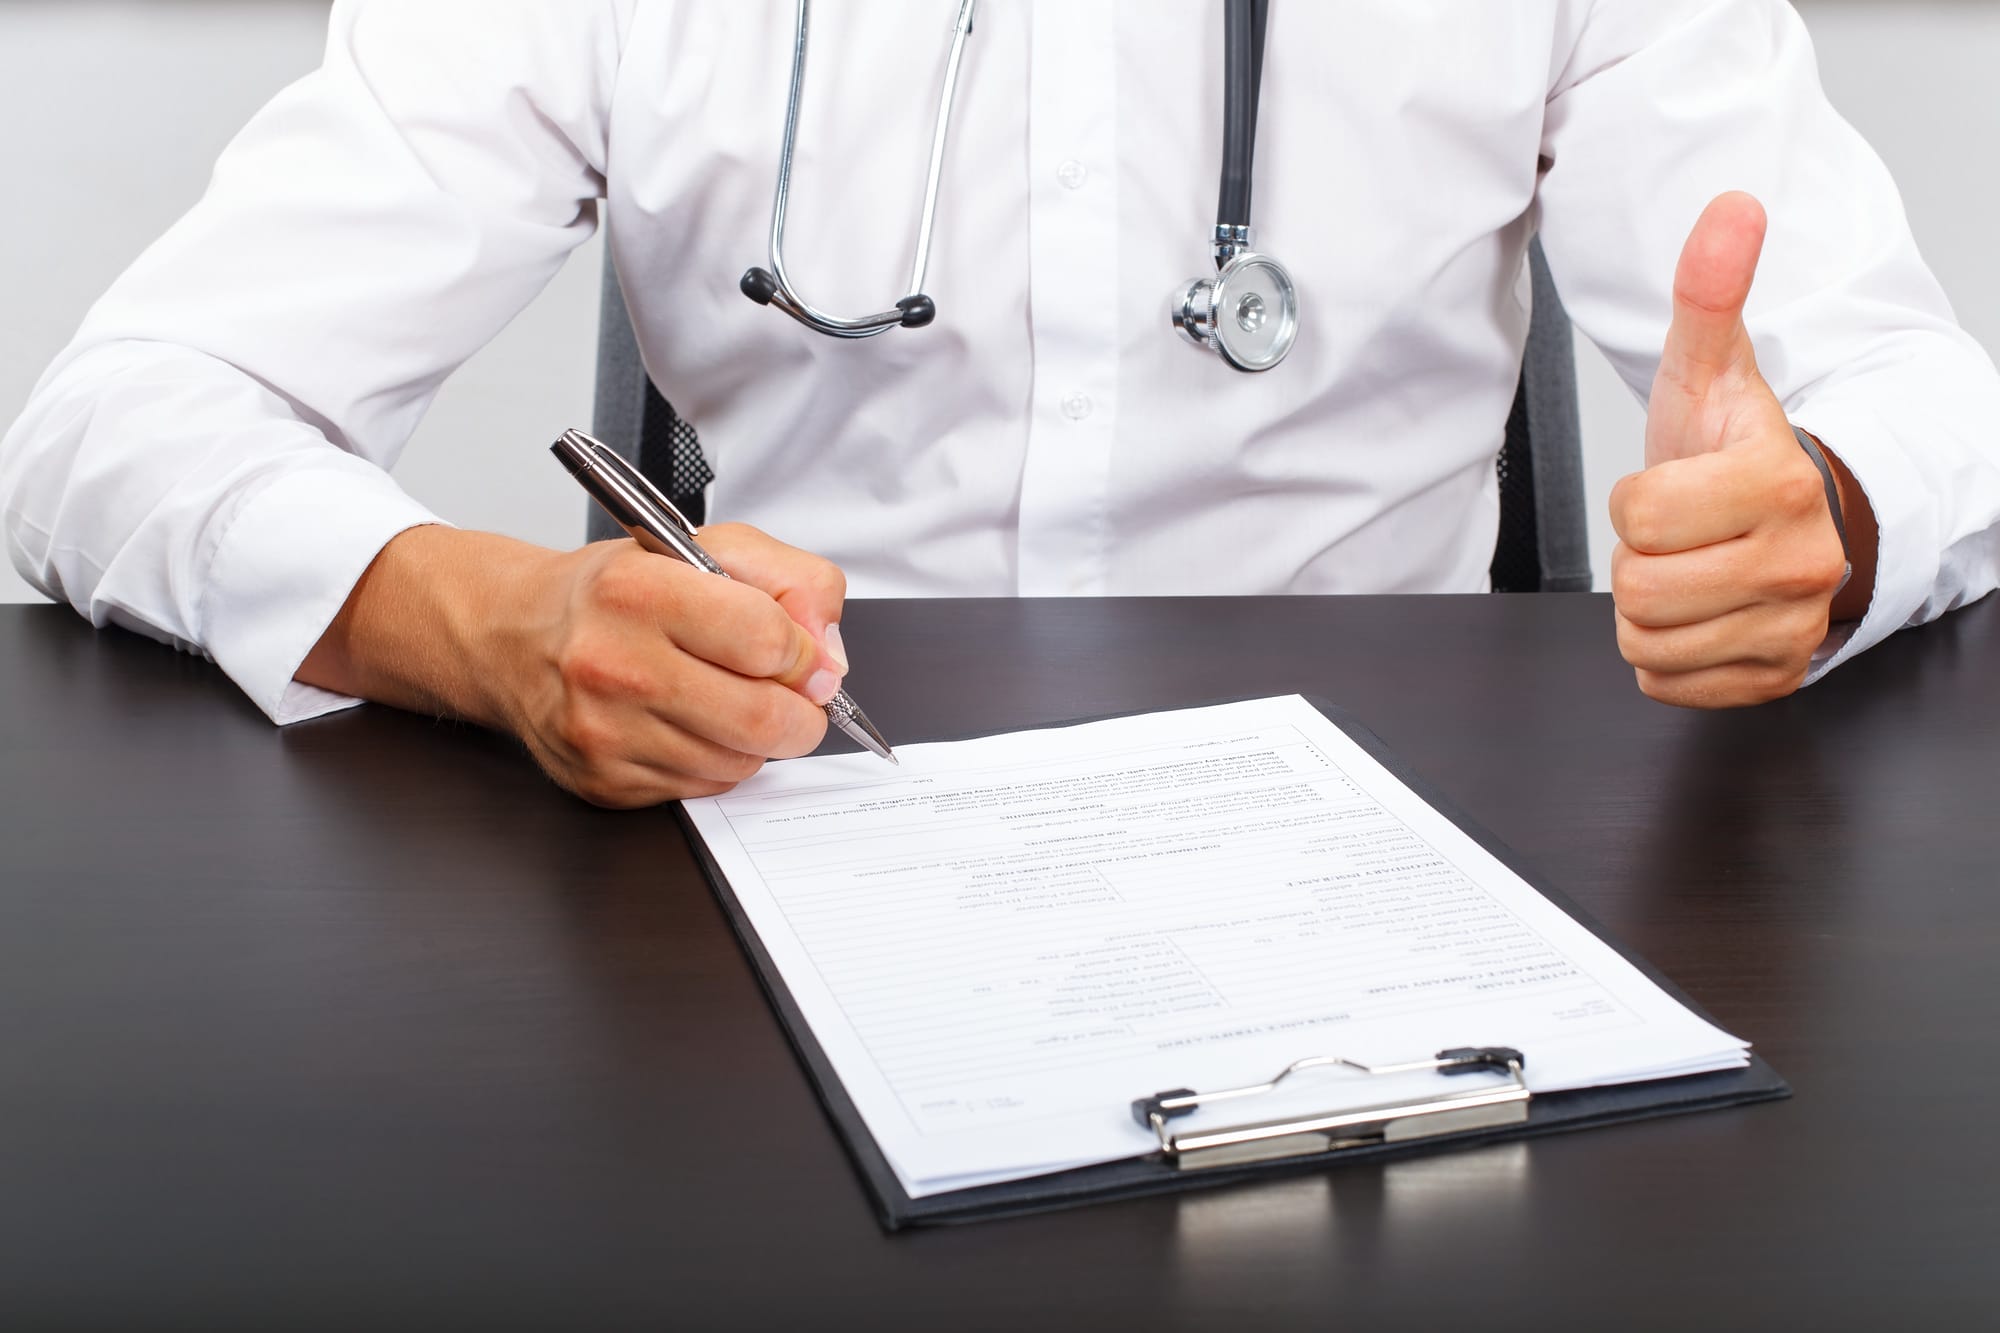 Picture of a doctor's hand signing on the medical report